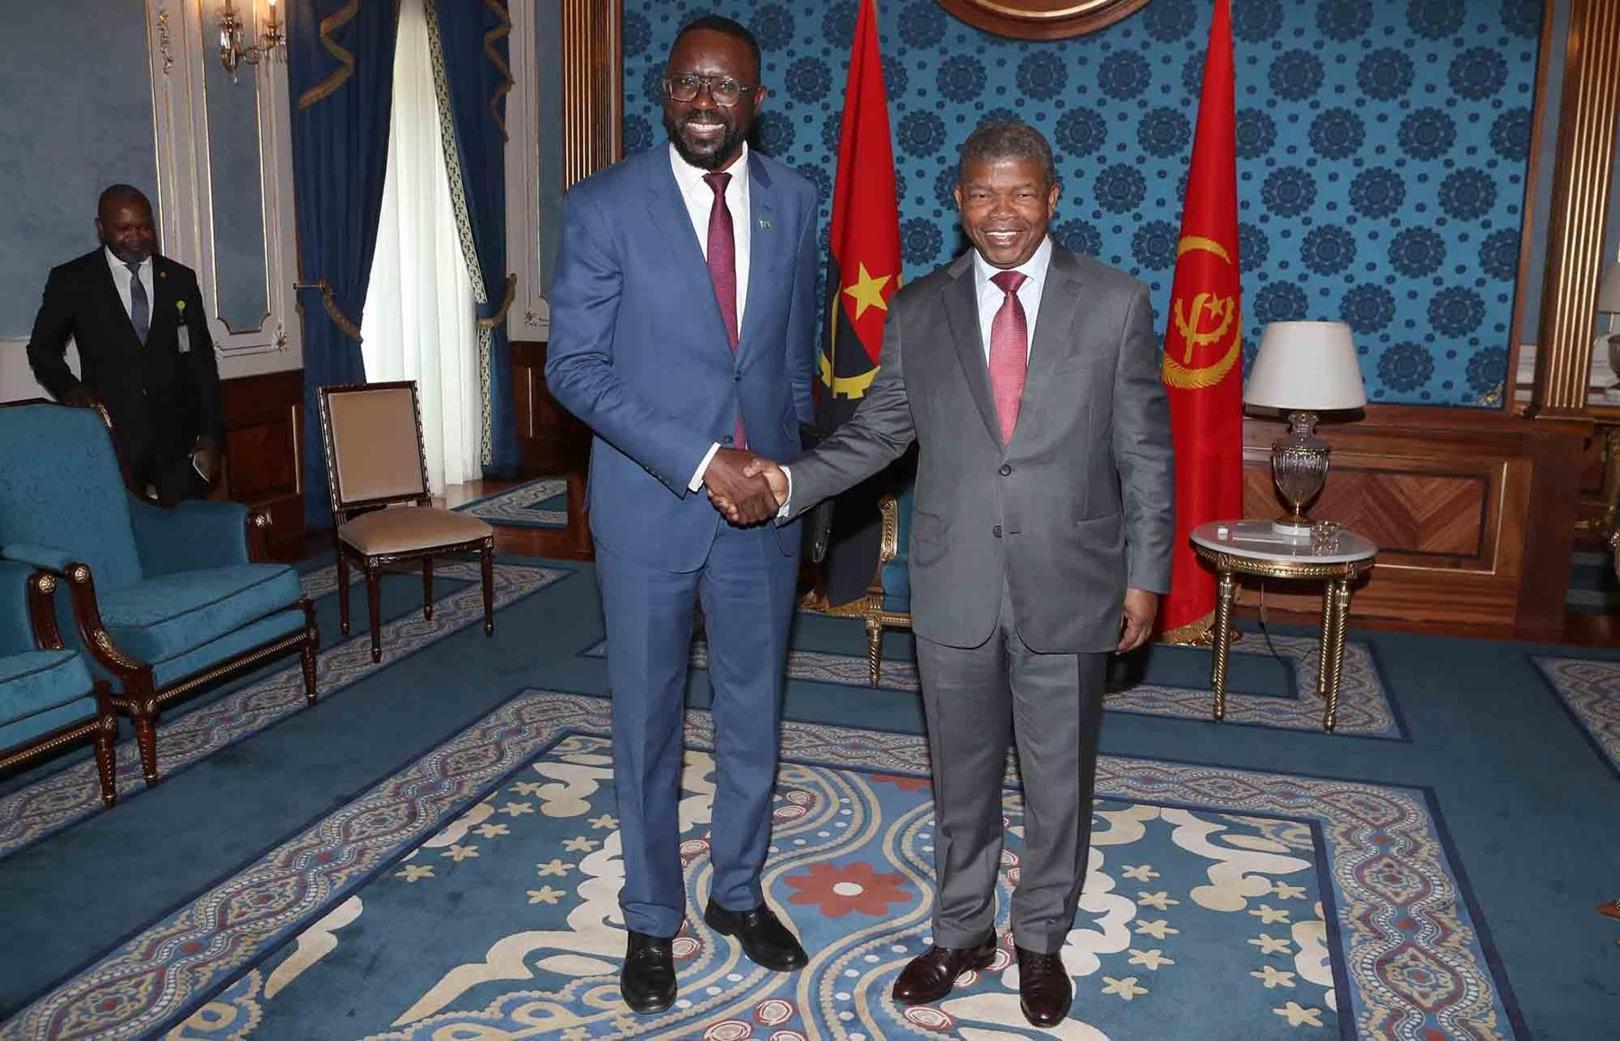 Angola and Zambia will be linked by oil pipeline